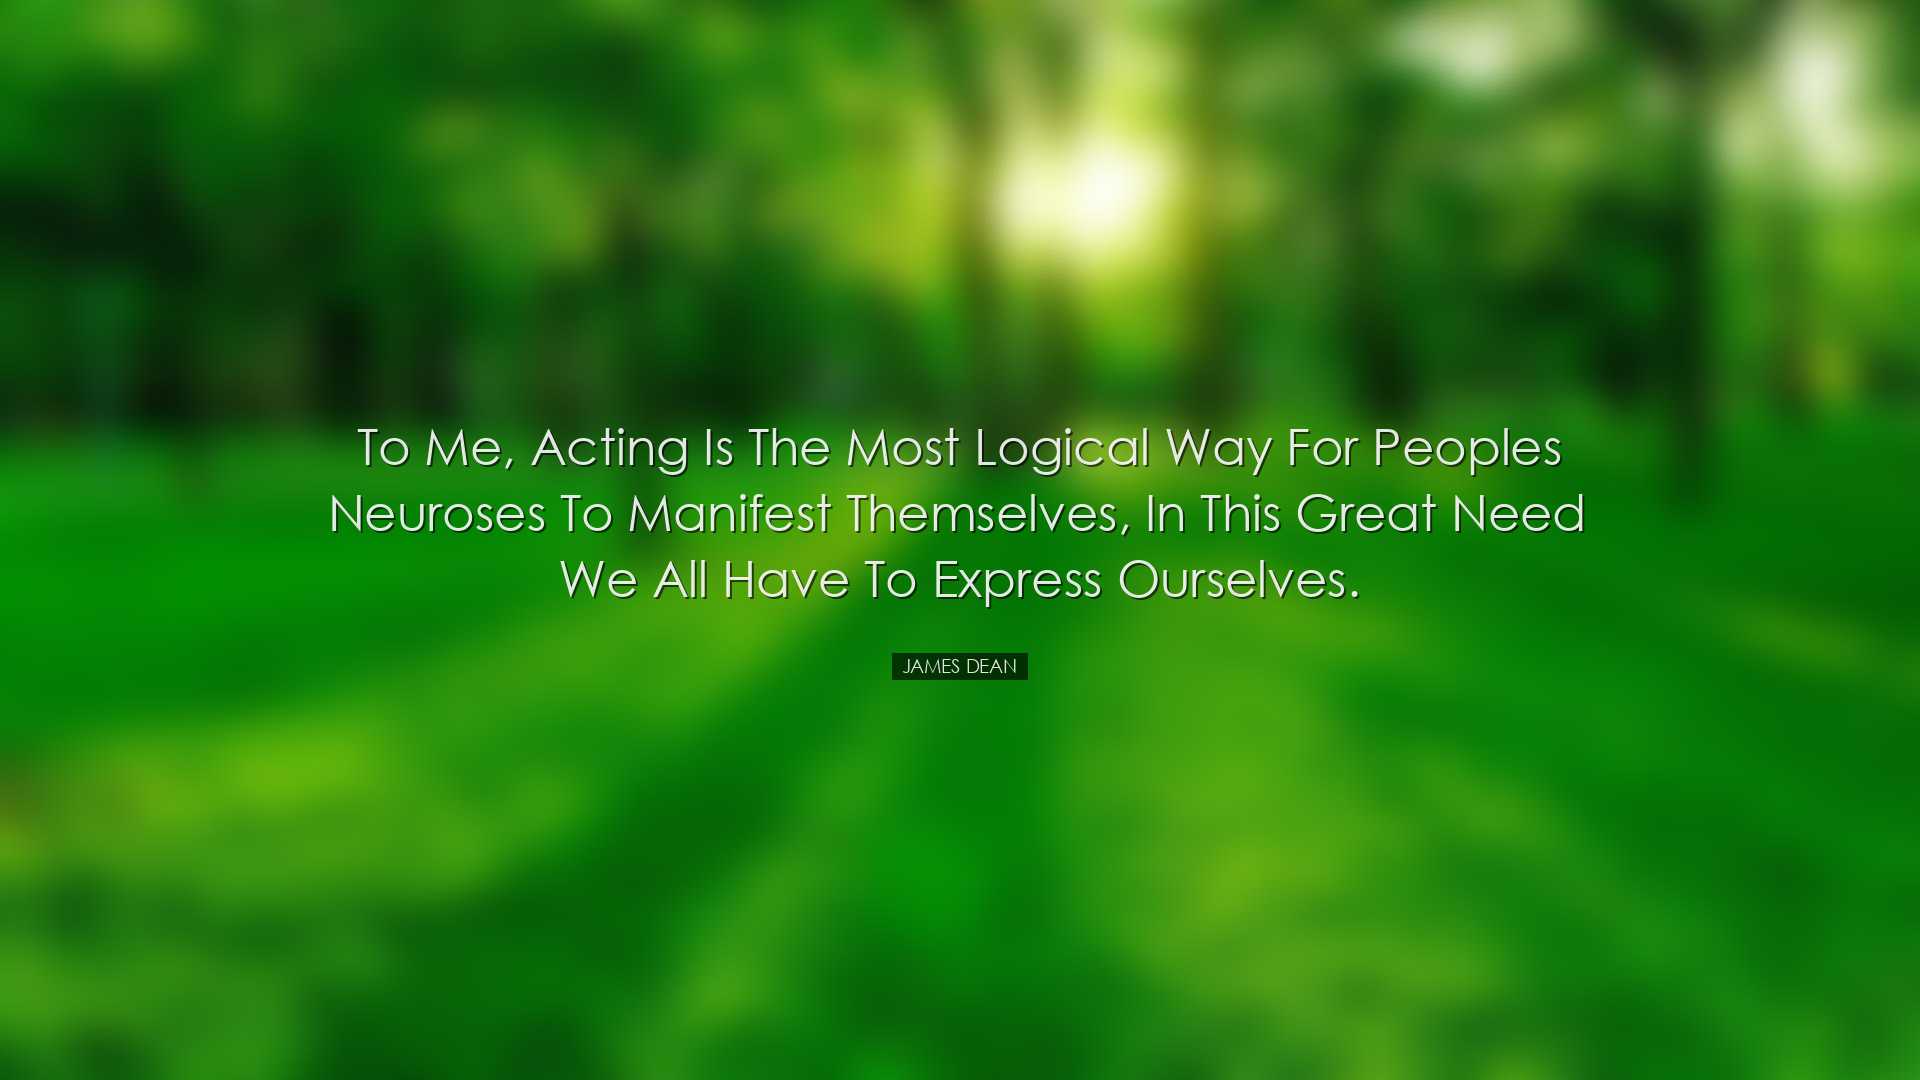 To me, acting is the most logical way for peoples neuroses to mani